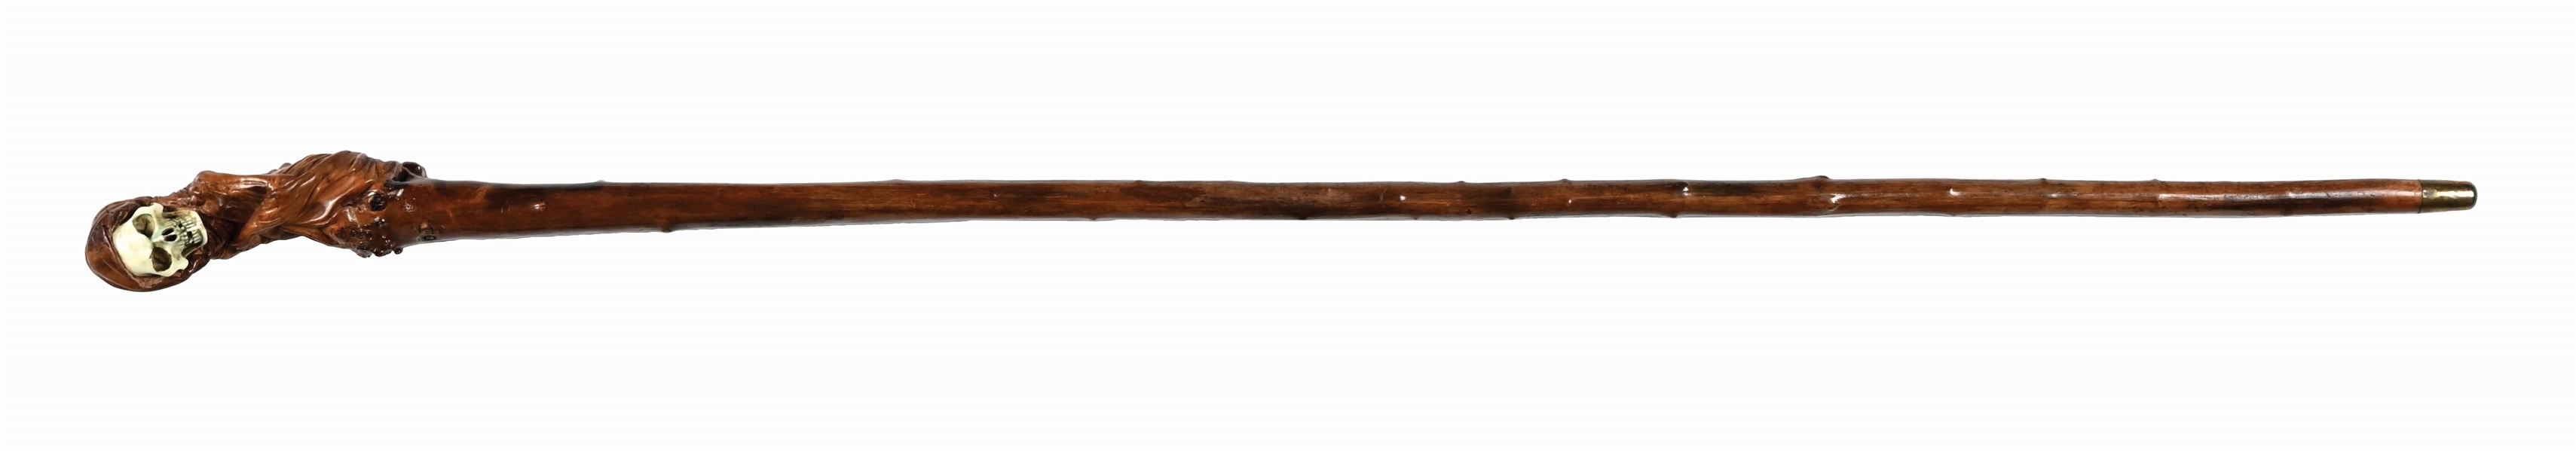 RARE ANTIQUE WALKING STICK CANE W/ CARVED WOODEN REAPER W/ IVORY SKULL FACE